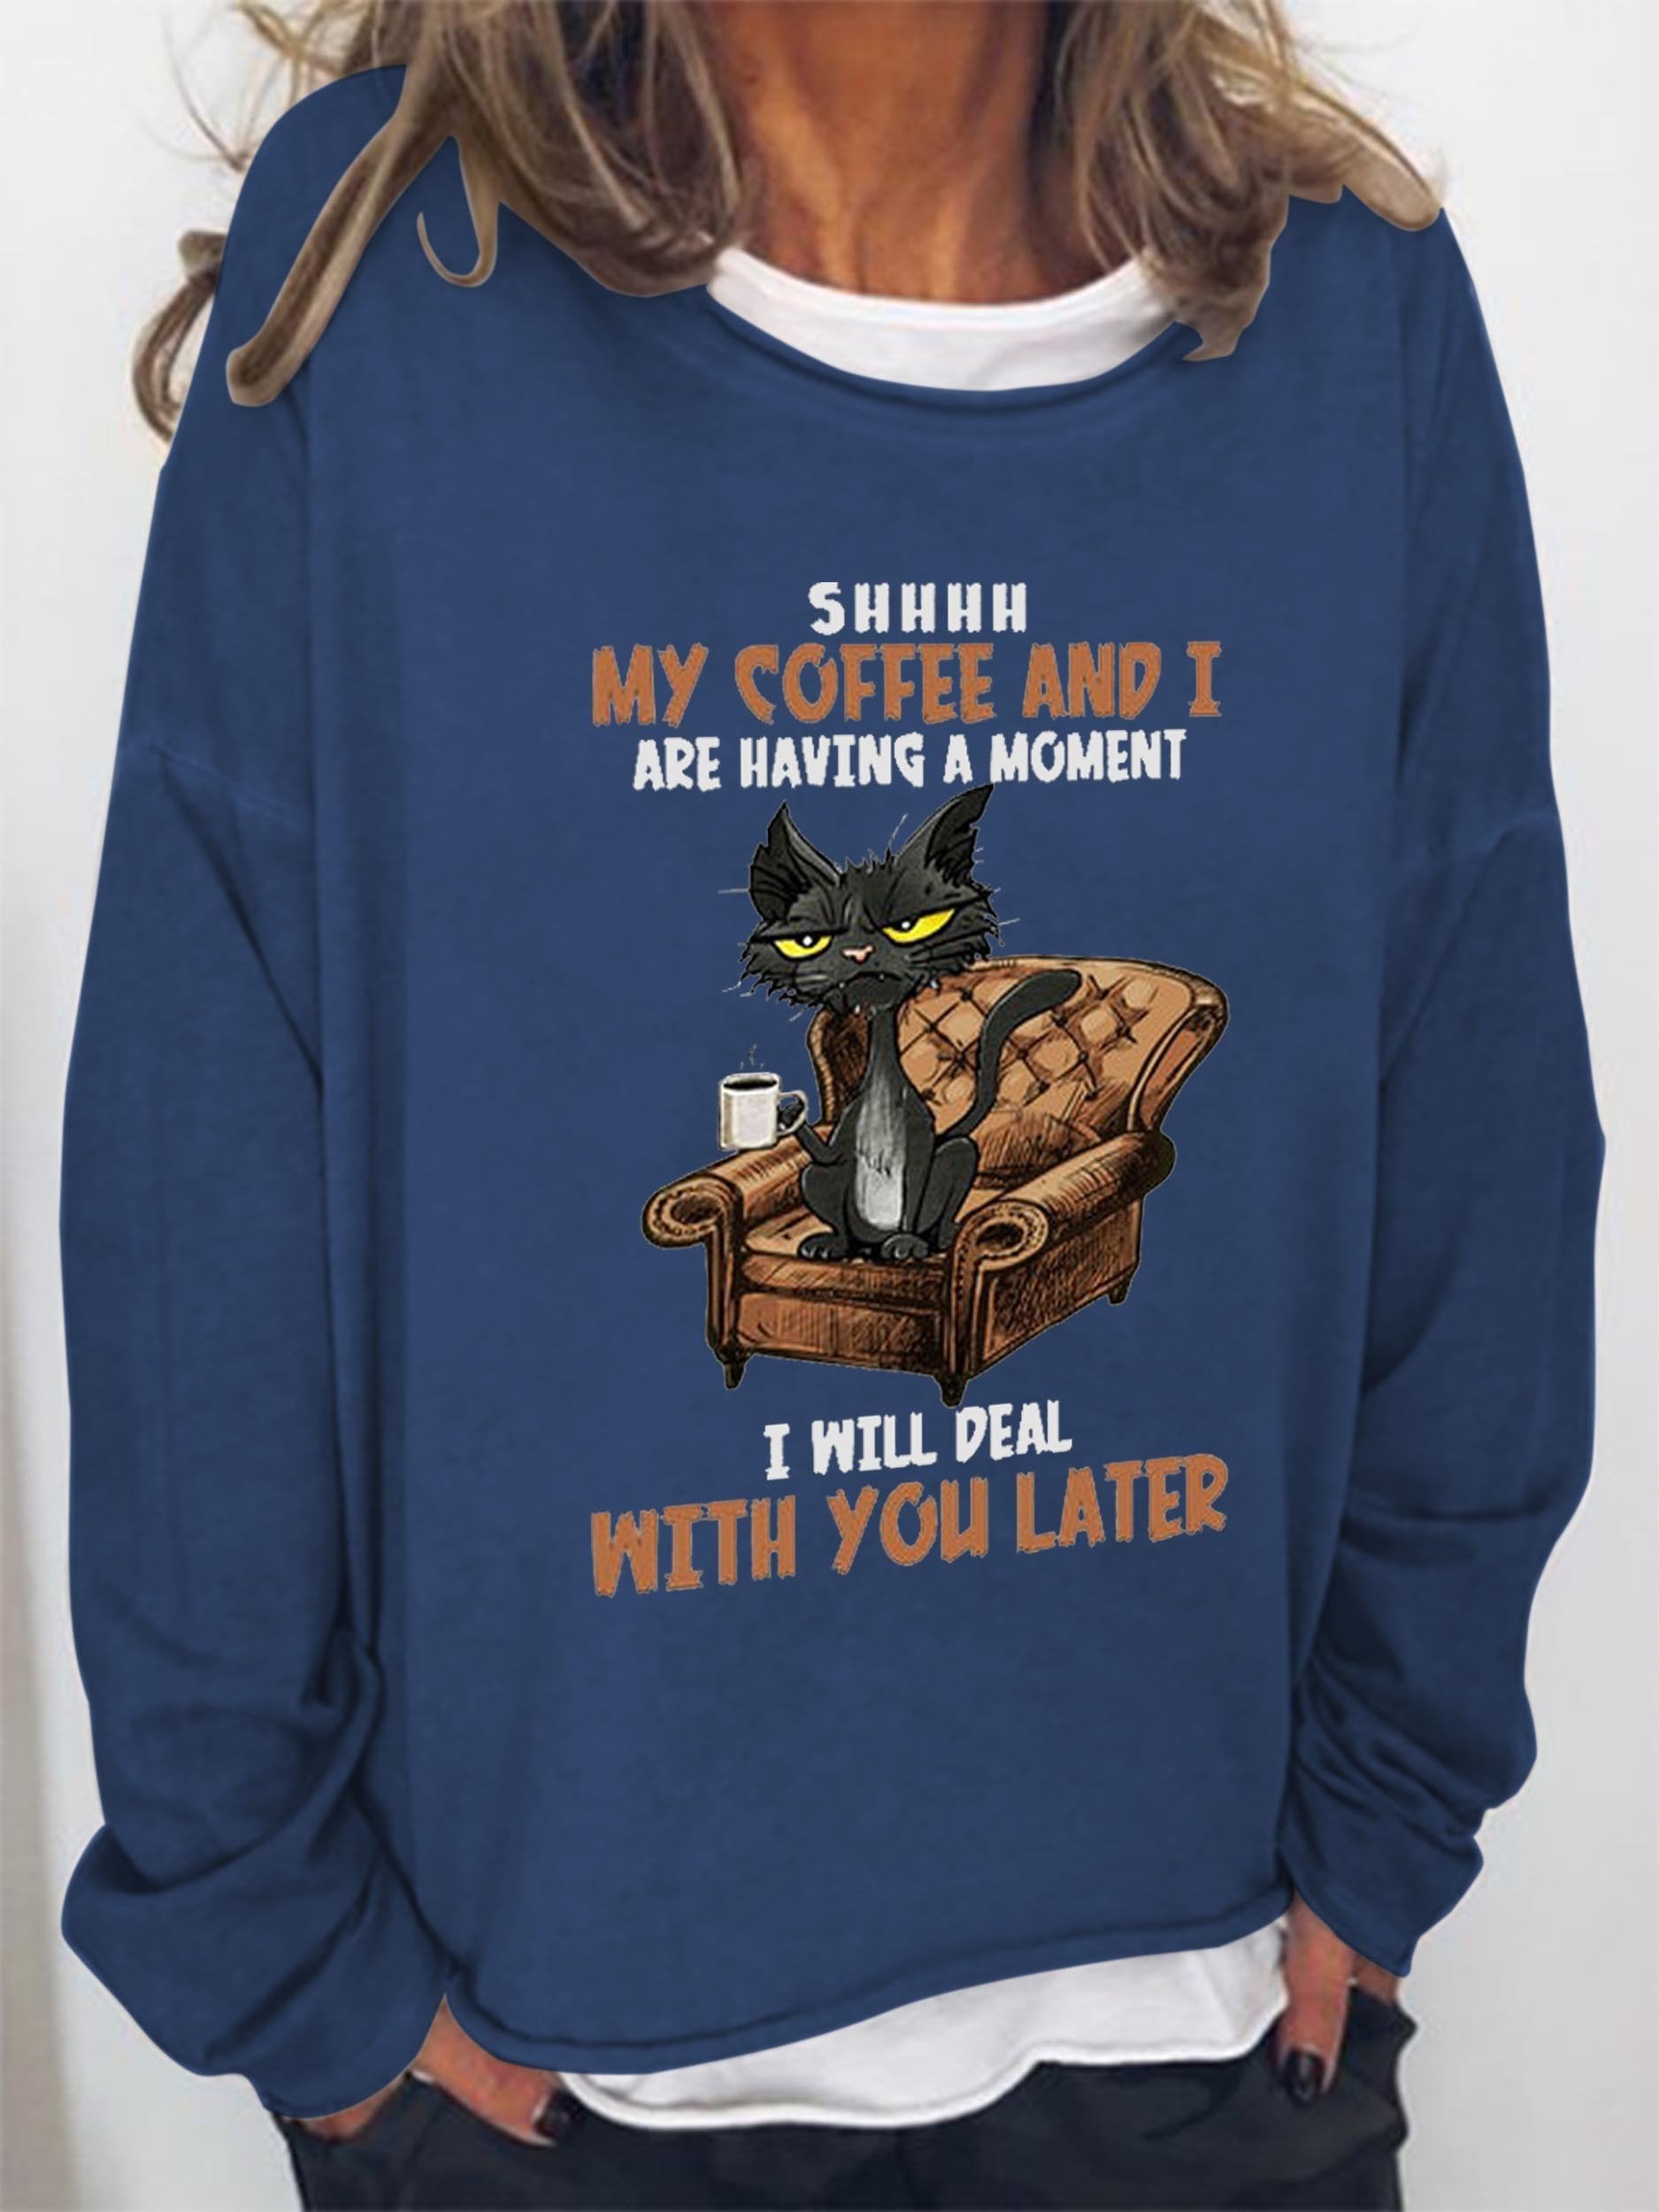 Women’S Shhhh My Coffee And I Are Having A Moment I Will Deal With You Later Long Sleeve Top